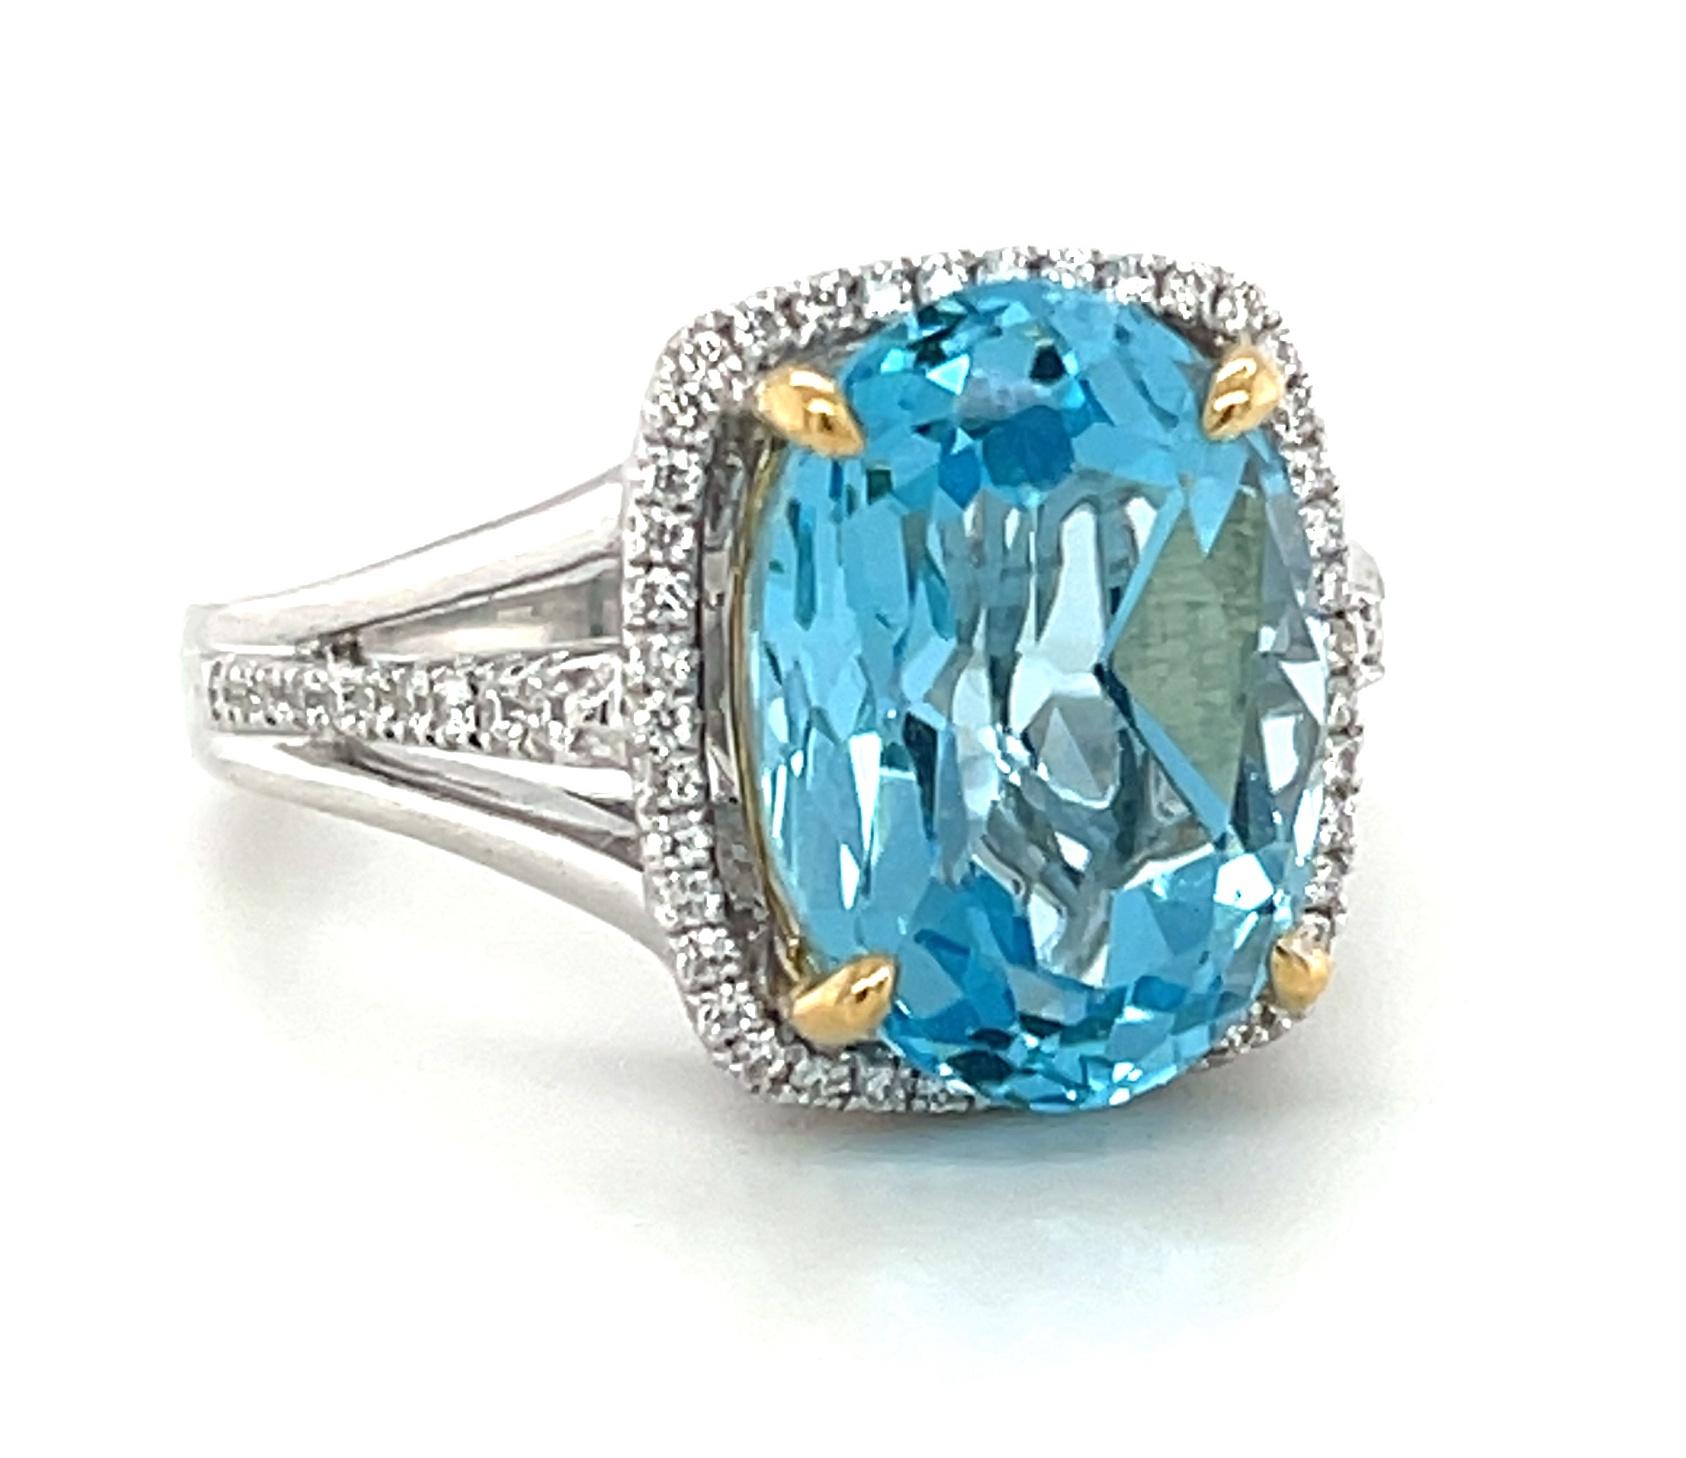 Artisan 8.59 Carat Blue Topaz and Diamond Halo Cocktail Ring in White and Yellow Gold For Sale